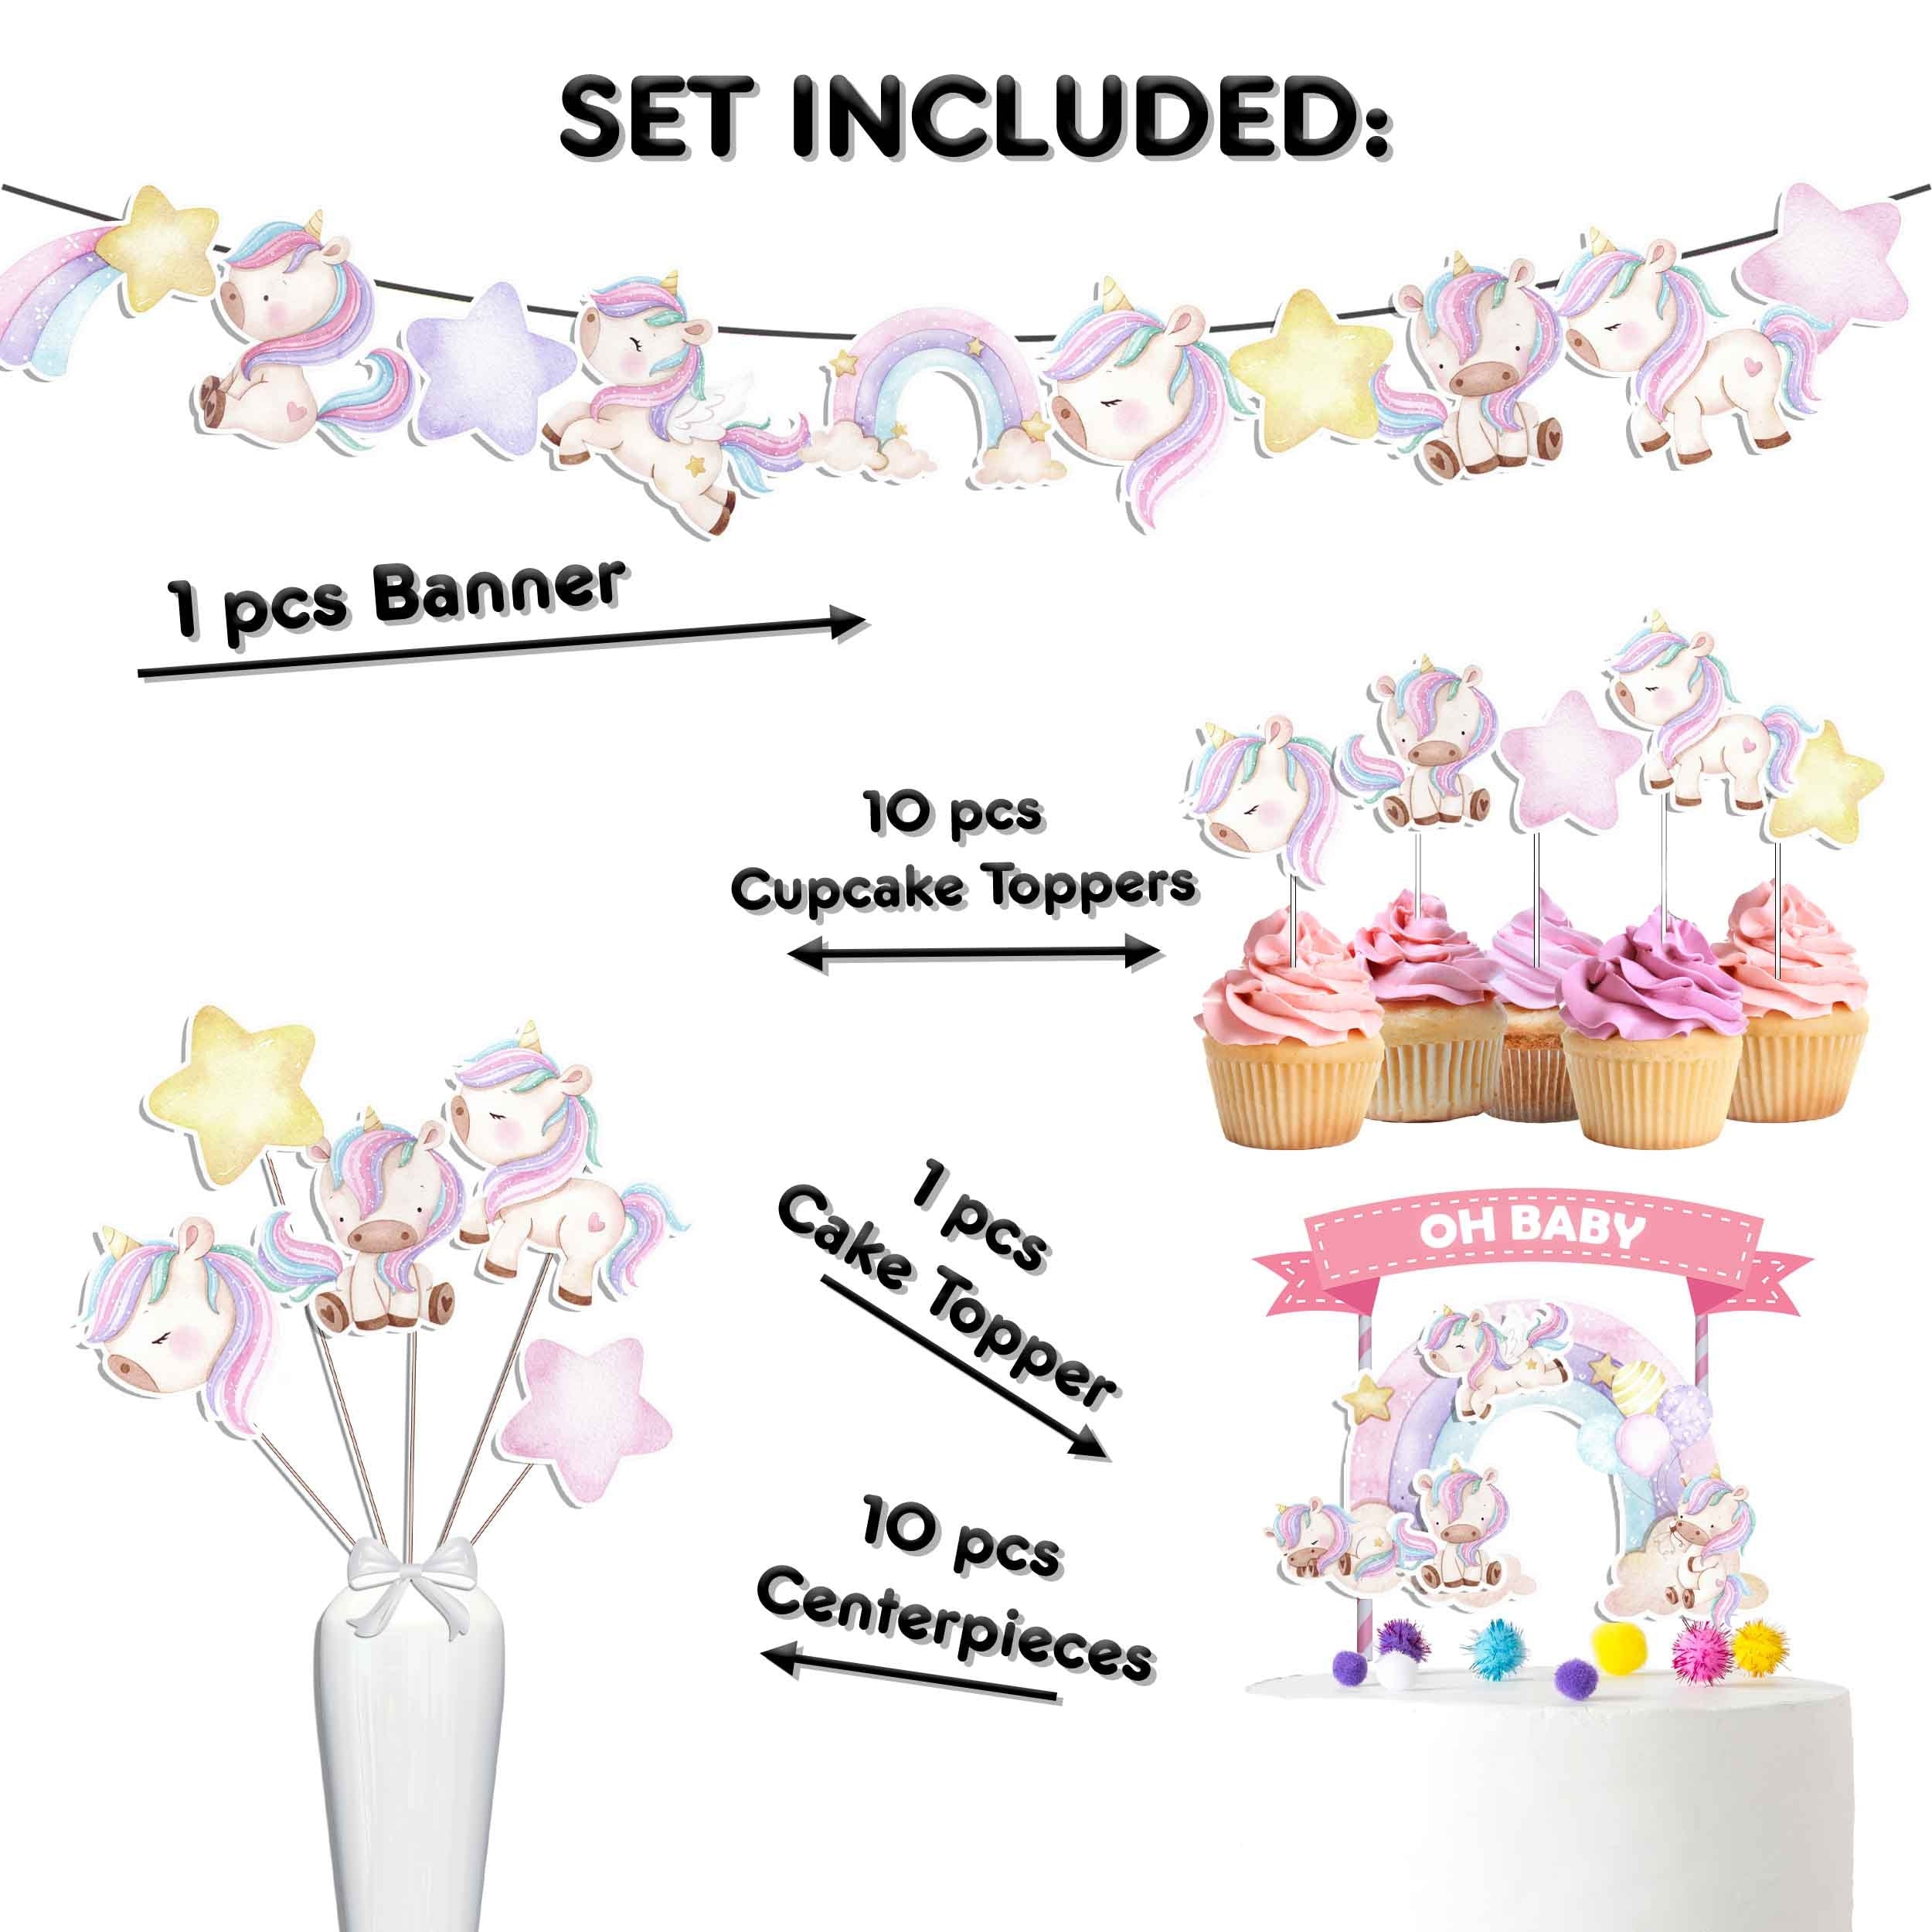 Enchanted Pastel Unicorn Party Decor Set - Dreamy Cake Topper, Cupcake Toppers, Centerpieces & Banner - Magical Celebration for All Ages